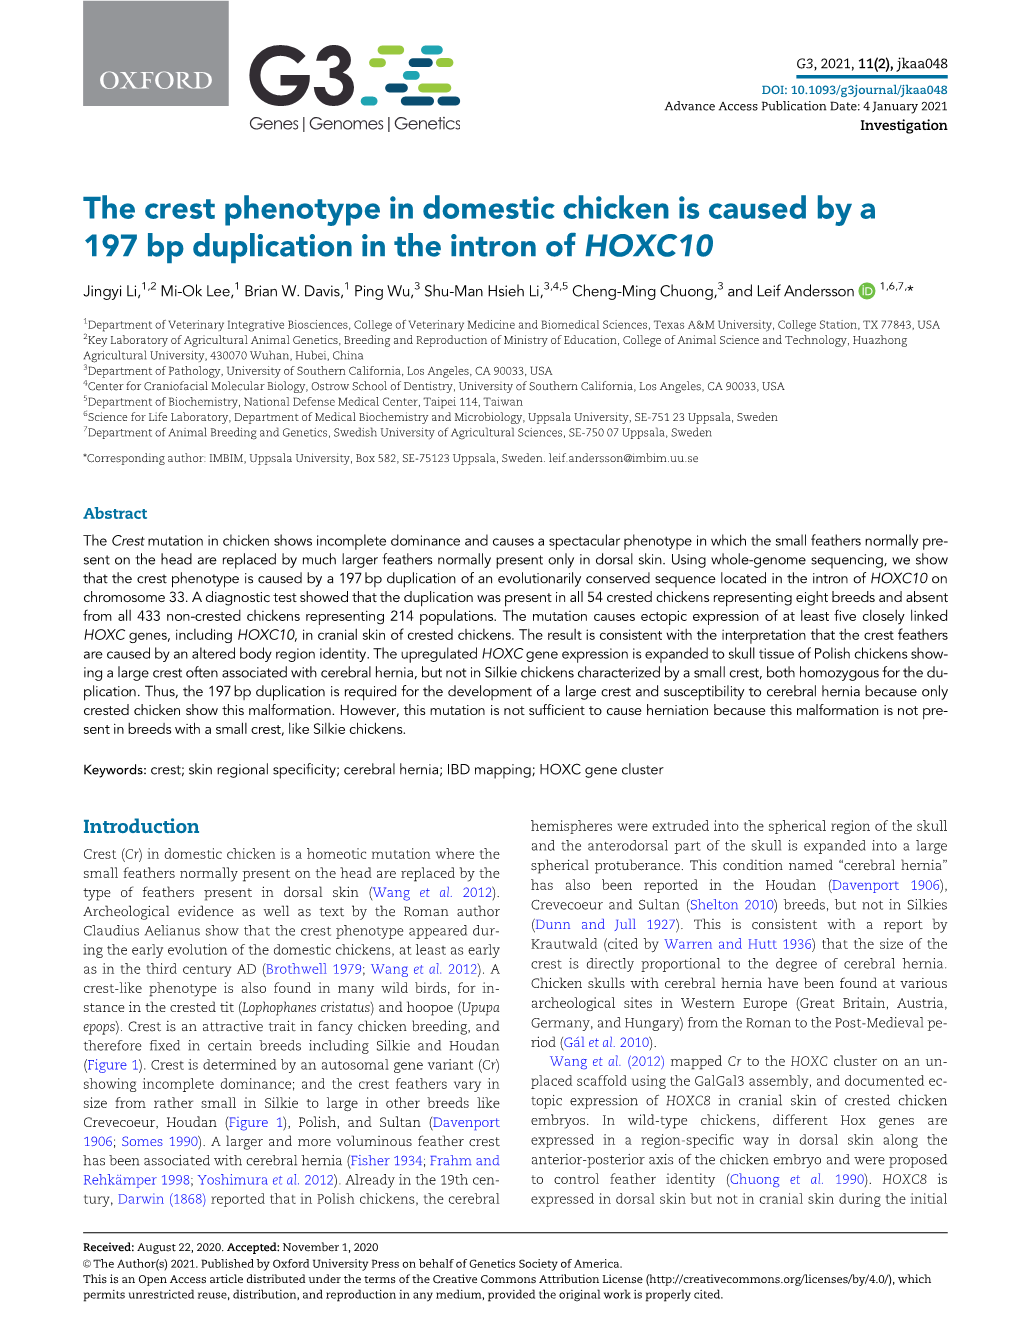 The Crest Phenotype in Domestic Chicken Is Caused by a 197 Bp Duplication in the Intron of HOXC10